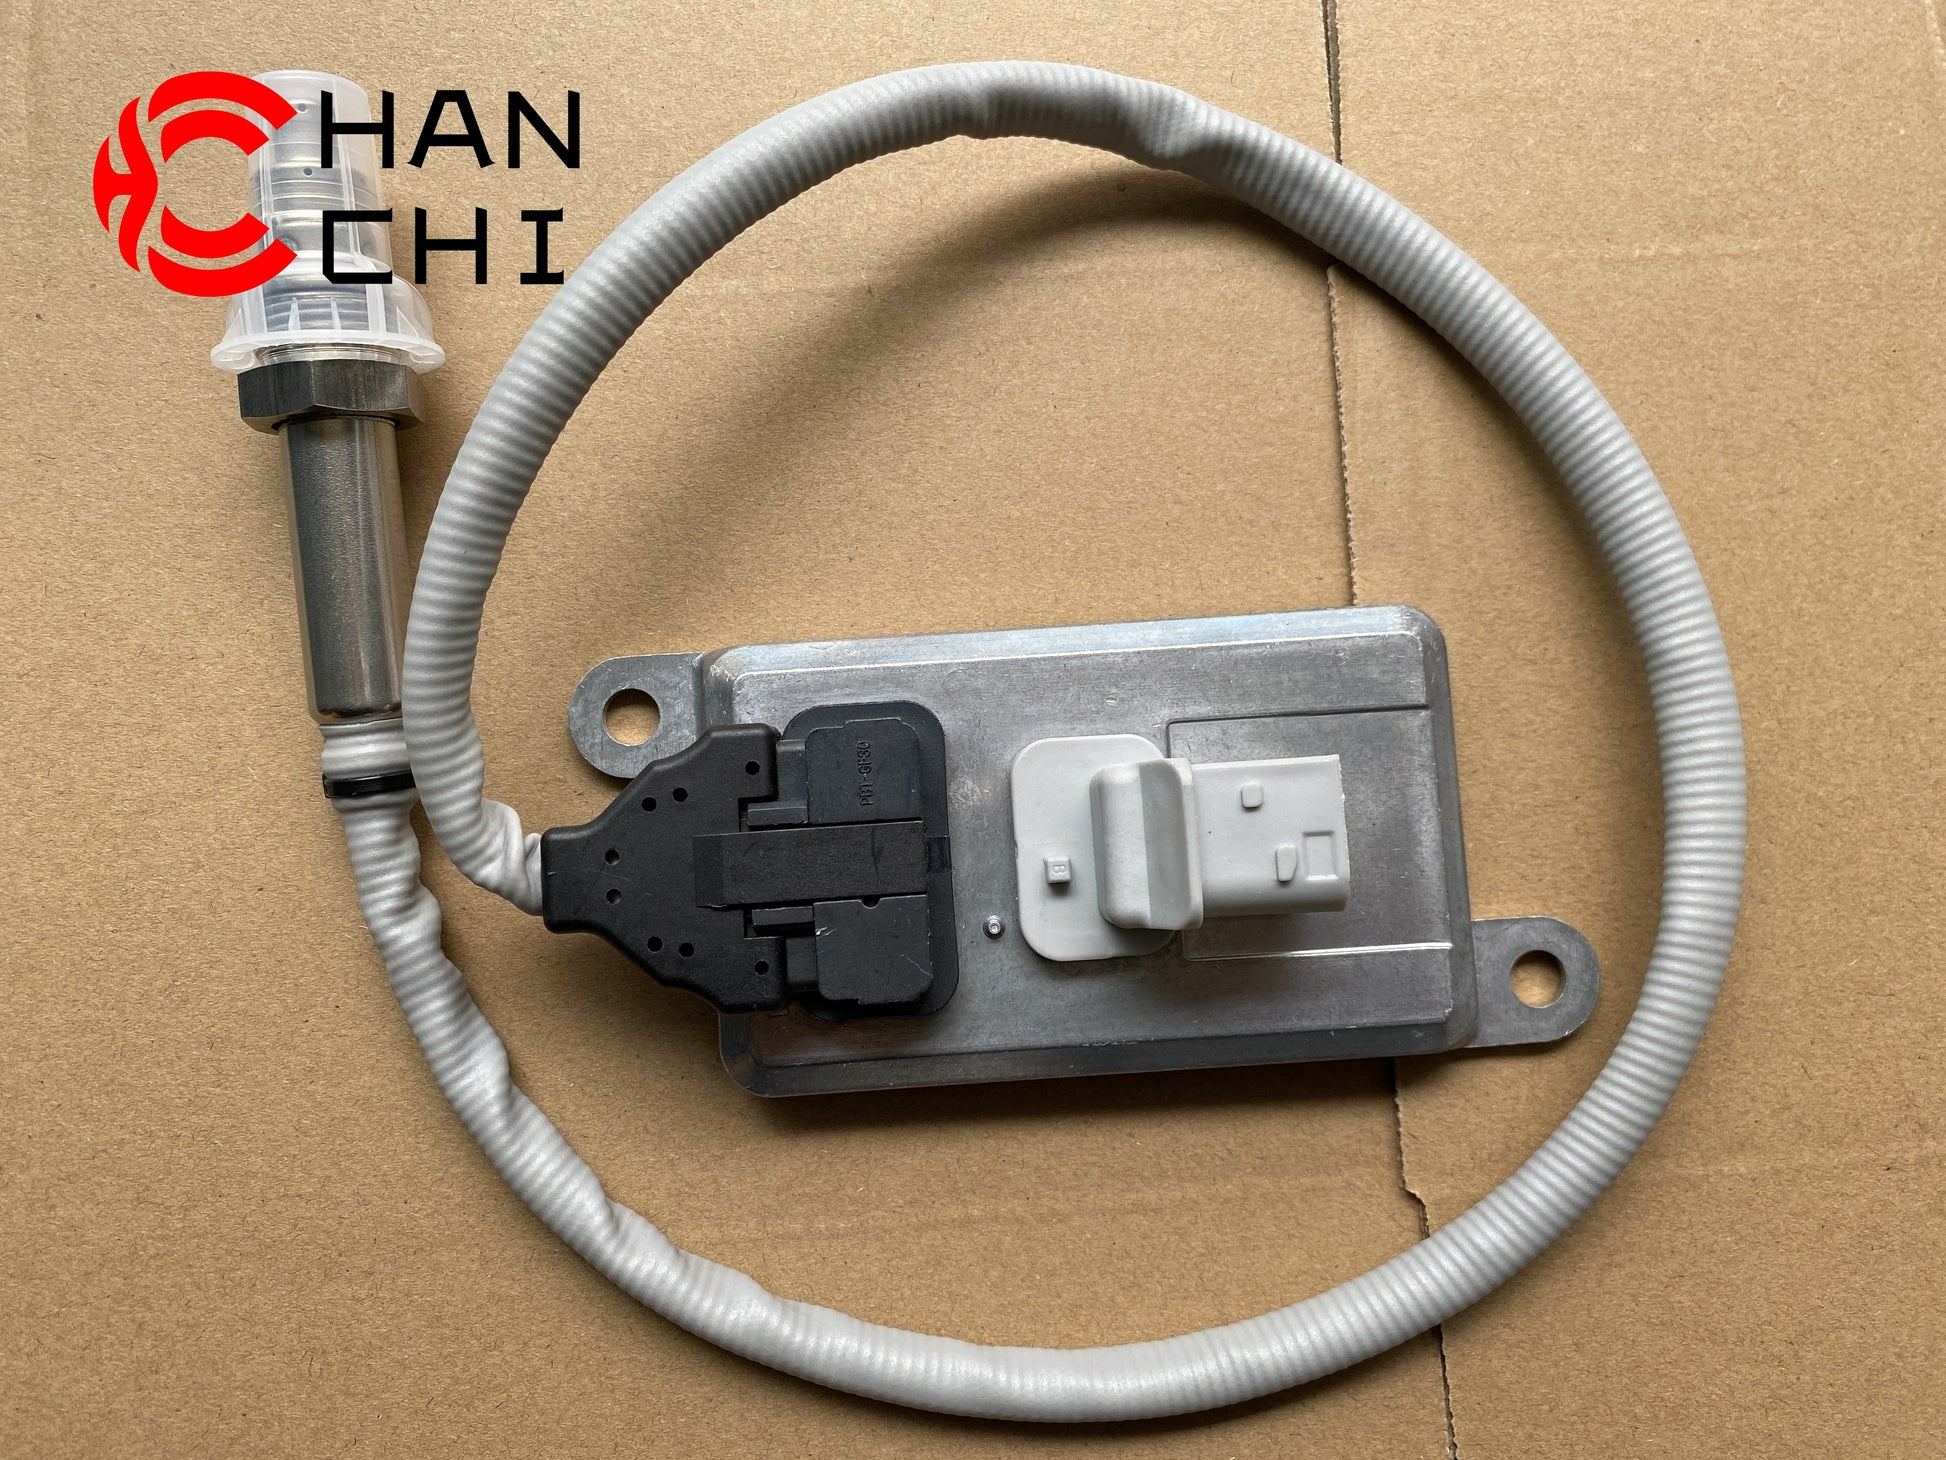 OEM: 51.15408-0019 5WK96790BMaterial: ABS metalColor: black silverOrigin: Made in ChinaWeight: 400gPacking List: 1* Nitrogen oxide sensor NOx More ServiceWe can provide OEM Manufacturing serviceWe can Be your one-step solution for Auto PartsWe can provide technical scheme for you Feel Free to Contact Us, We will get back to you as soon as possible.